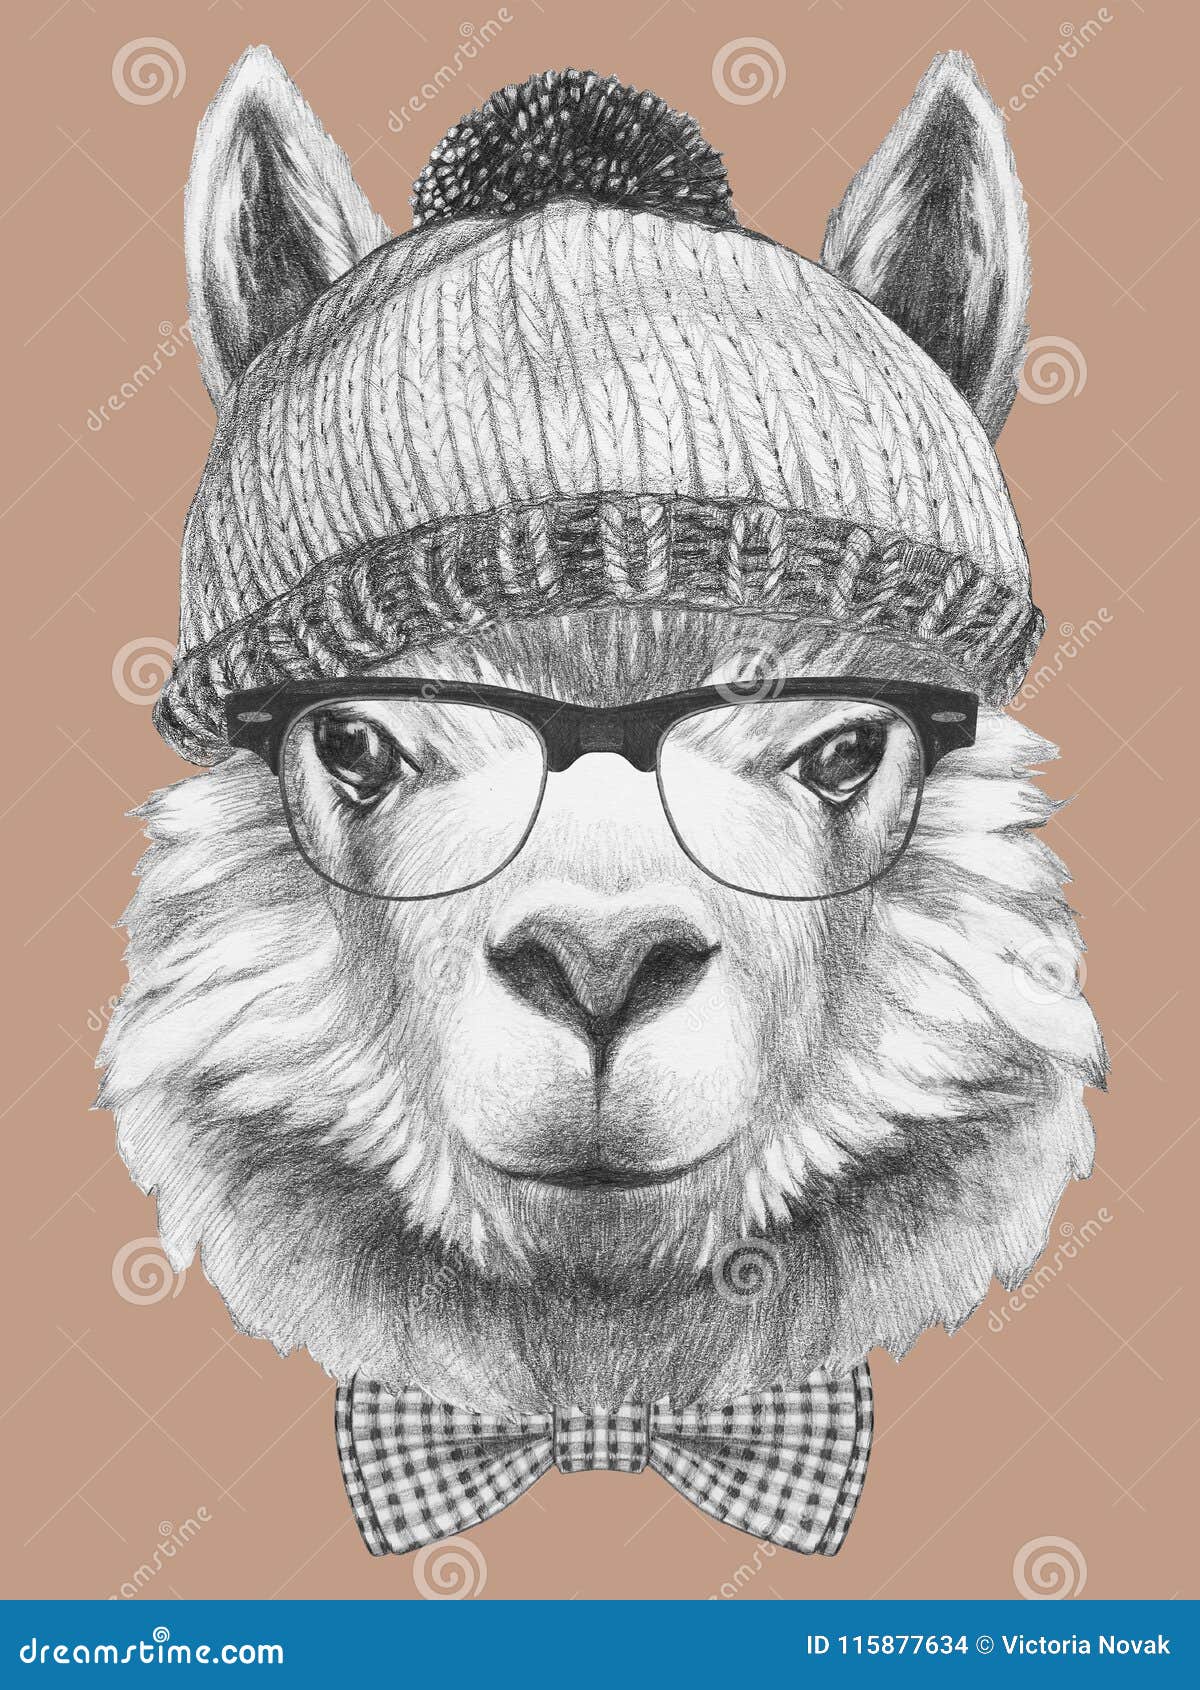 Portrait of of Lama with Sunglasses, Hat and Bow Tie, Hand-drawn Illustration Stock Illustration - of funny: 115877634